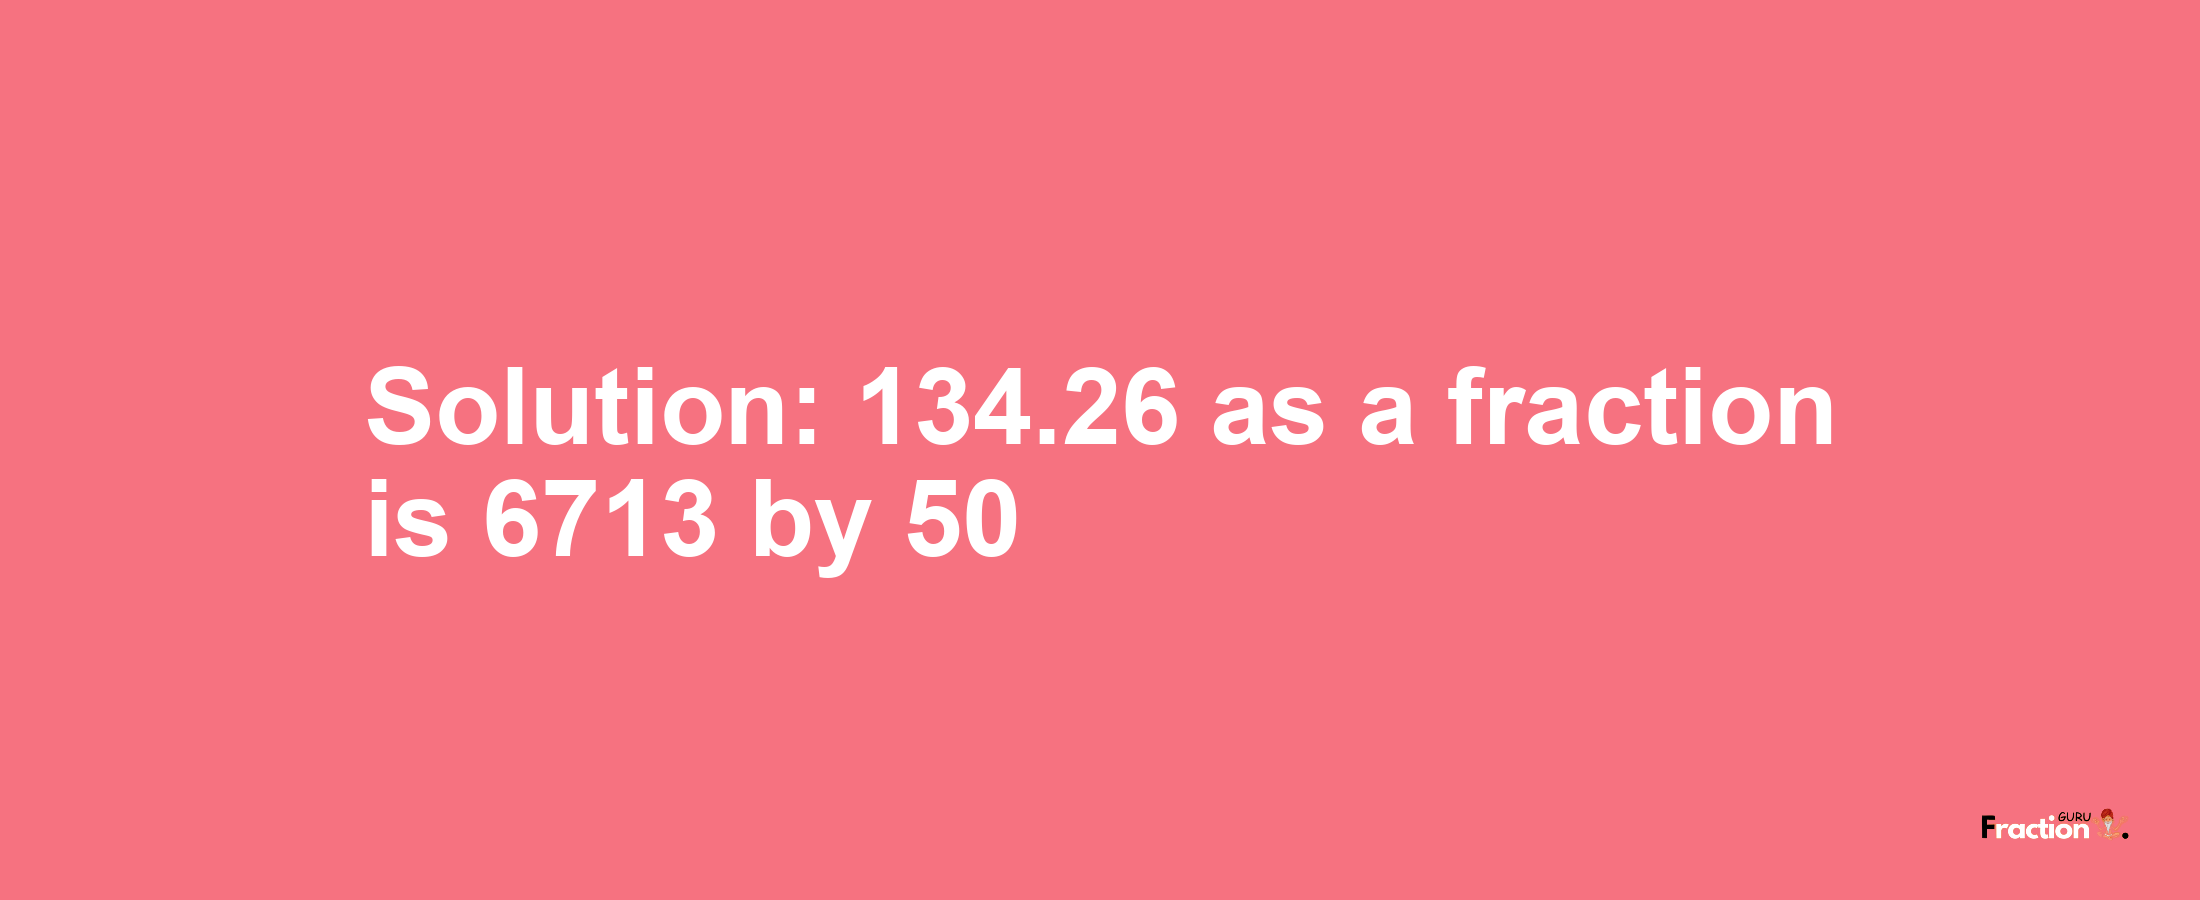 Solution:134.26 as a fraction is 6713/50